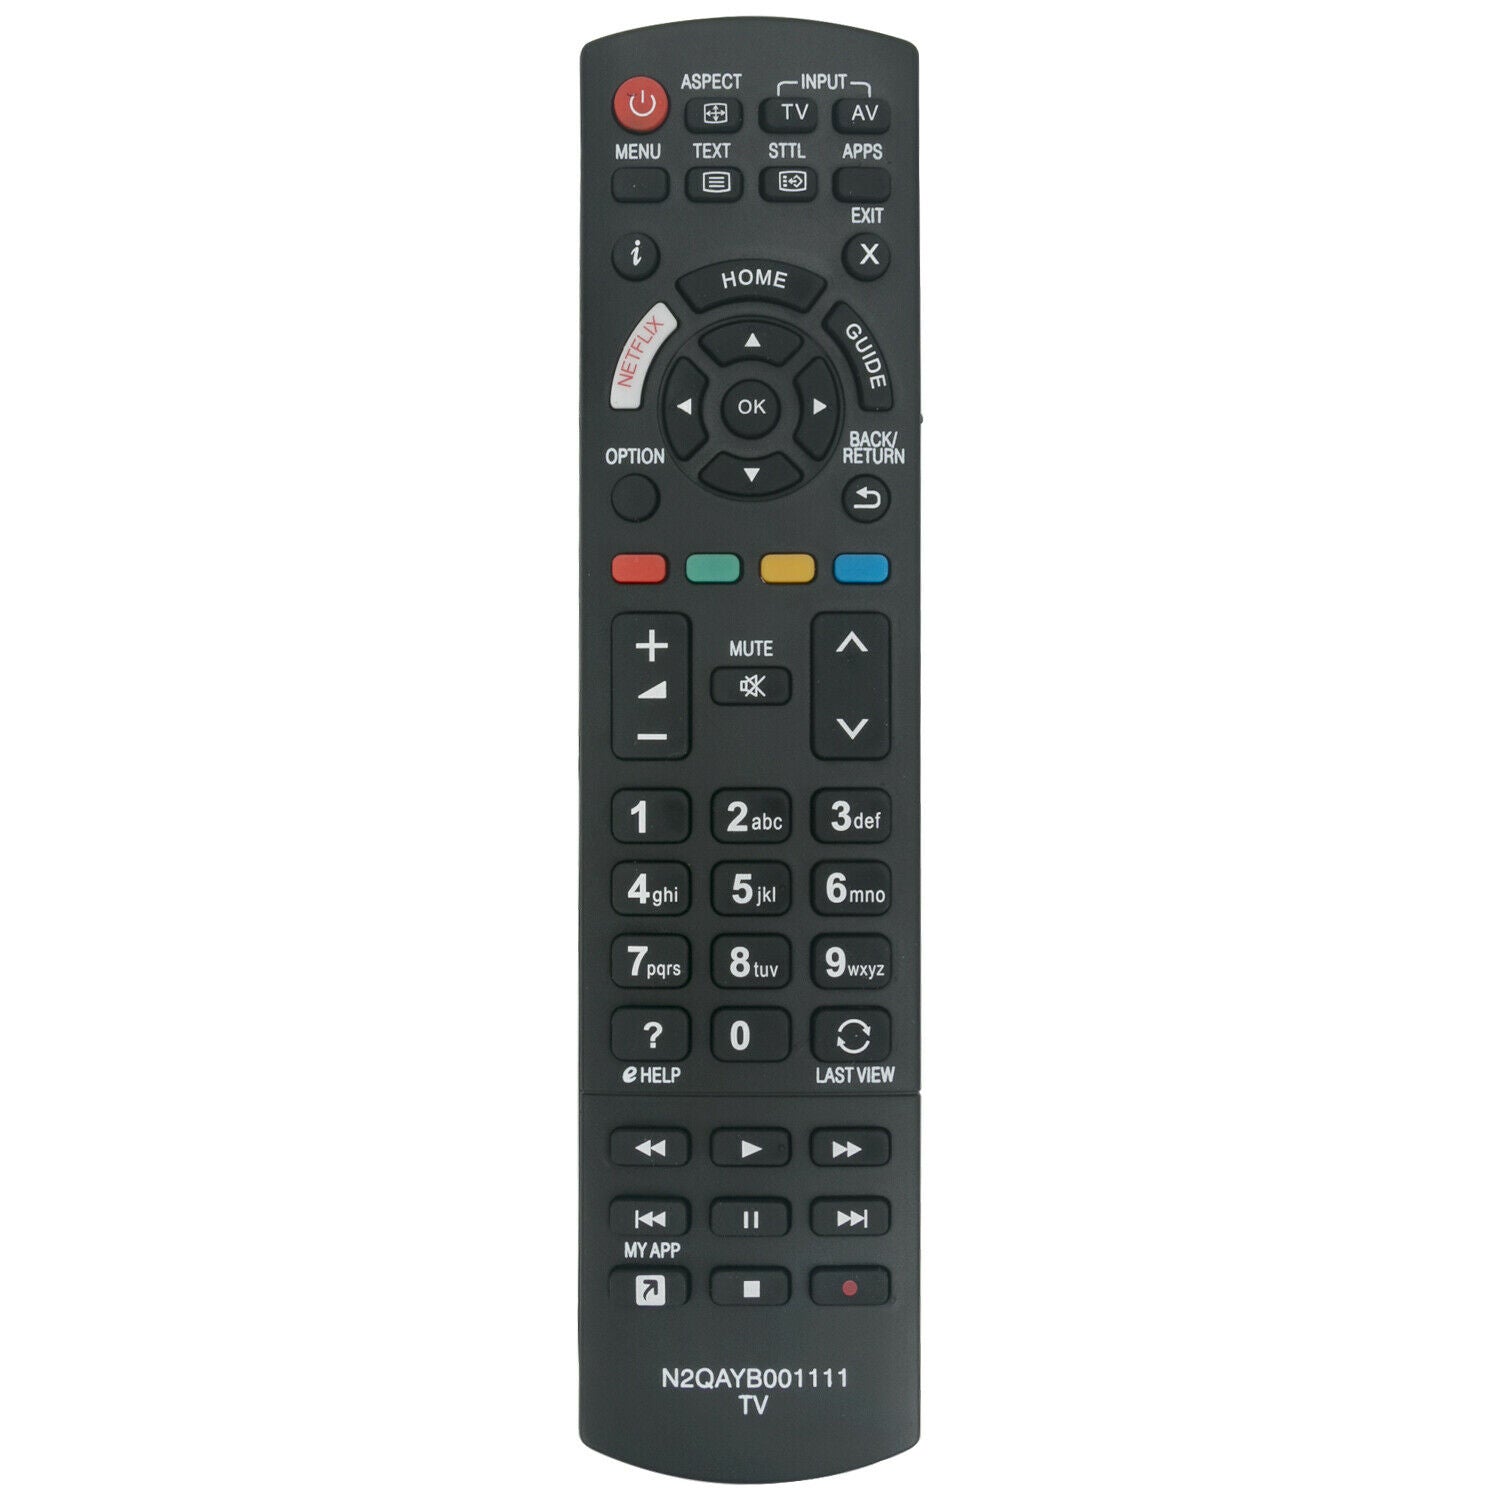 N2QAYB001111 Remote Replacement For Panasonic Smart Netflix LED TV